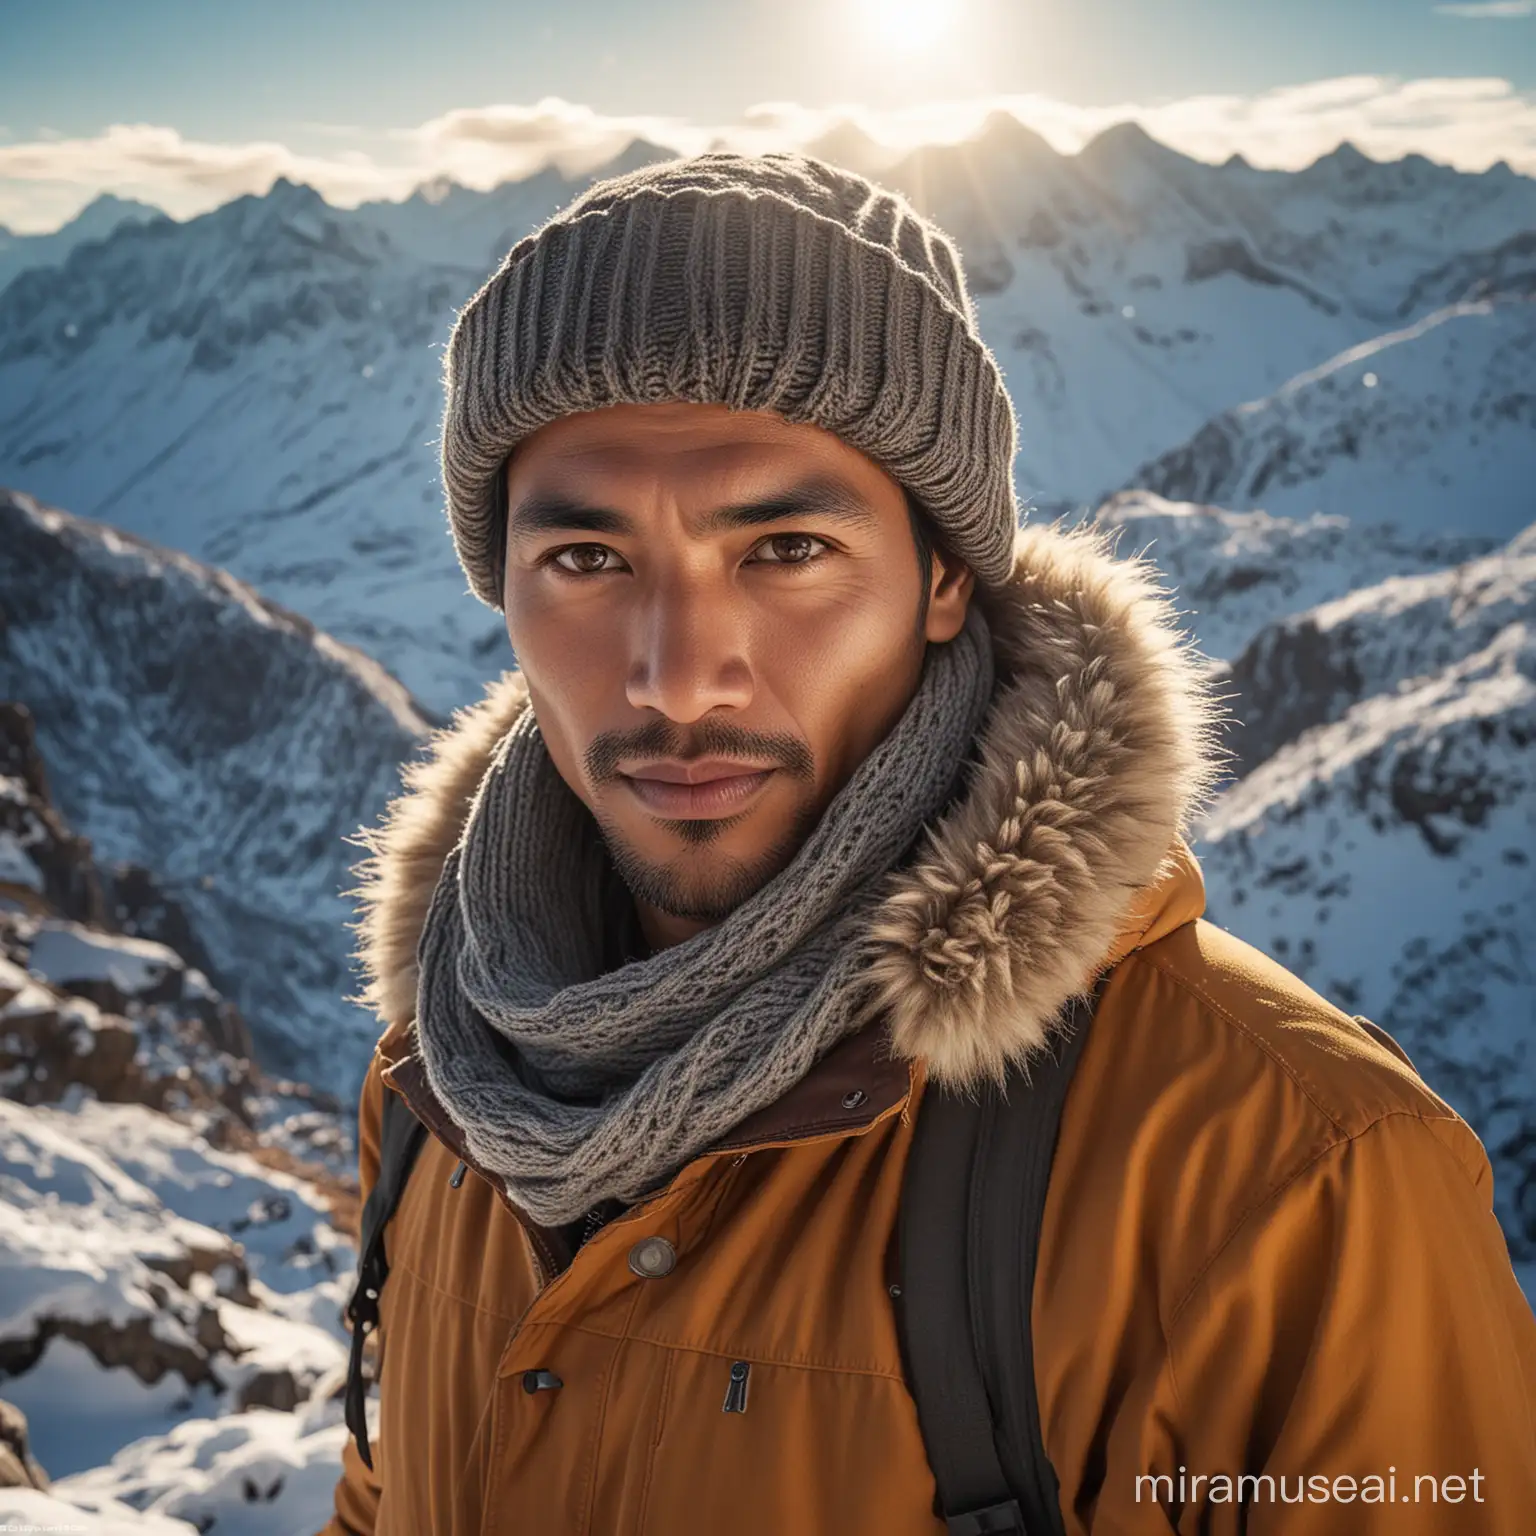 A 40 year old indonesian handsome men with a serene expression stands proudly atop a majestic snow-covered mountain, bundled up in warm winter clothes to shield against the chill. Their face with light skin, illuminated by the brilliant sunlight on this beautiful day, captivates the viewer with its genuine beauty. This stunning photograph, taken with a Fujifilm XT3 camera, captures every intricate detail of their features in astonishingly high resolution – an impressive 8k UHD RAW photo. The image carries a subtle touch of film grain, lending it a nostalgic feel. With a direct gaze into the camera, it brings forth a remarkable sense of intimacy and connection